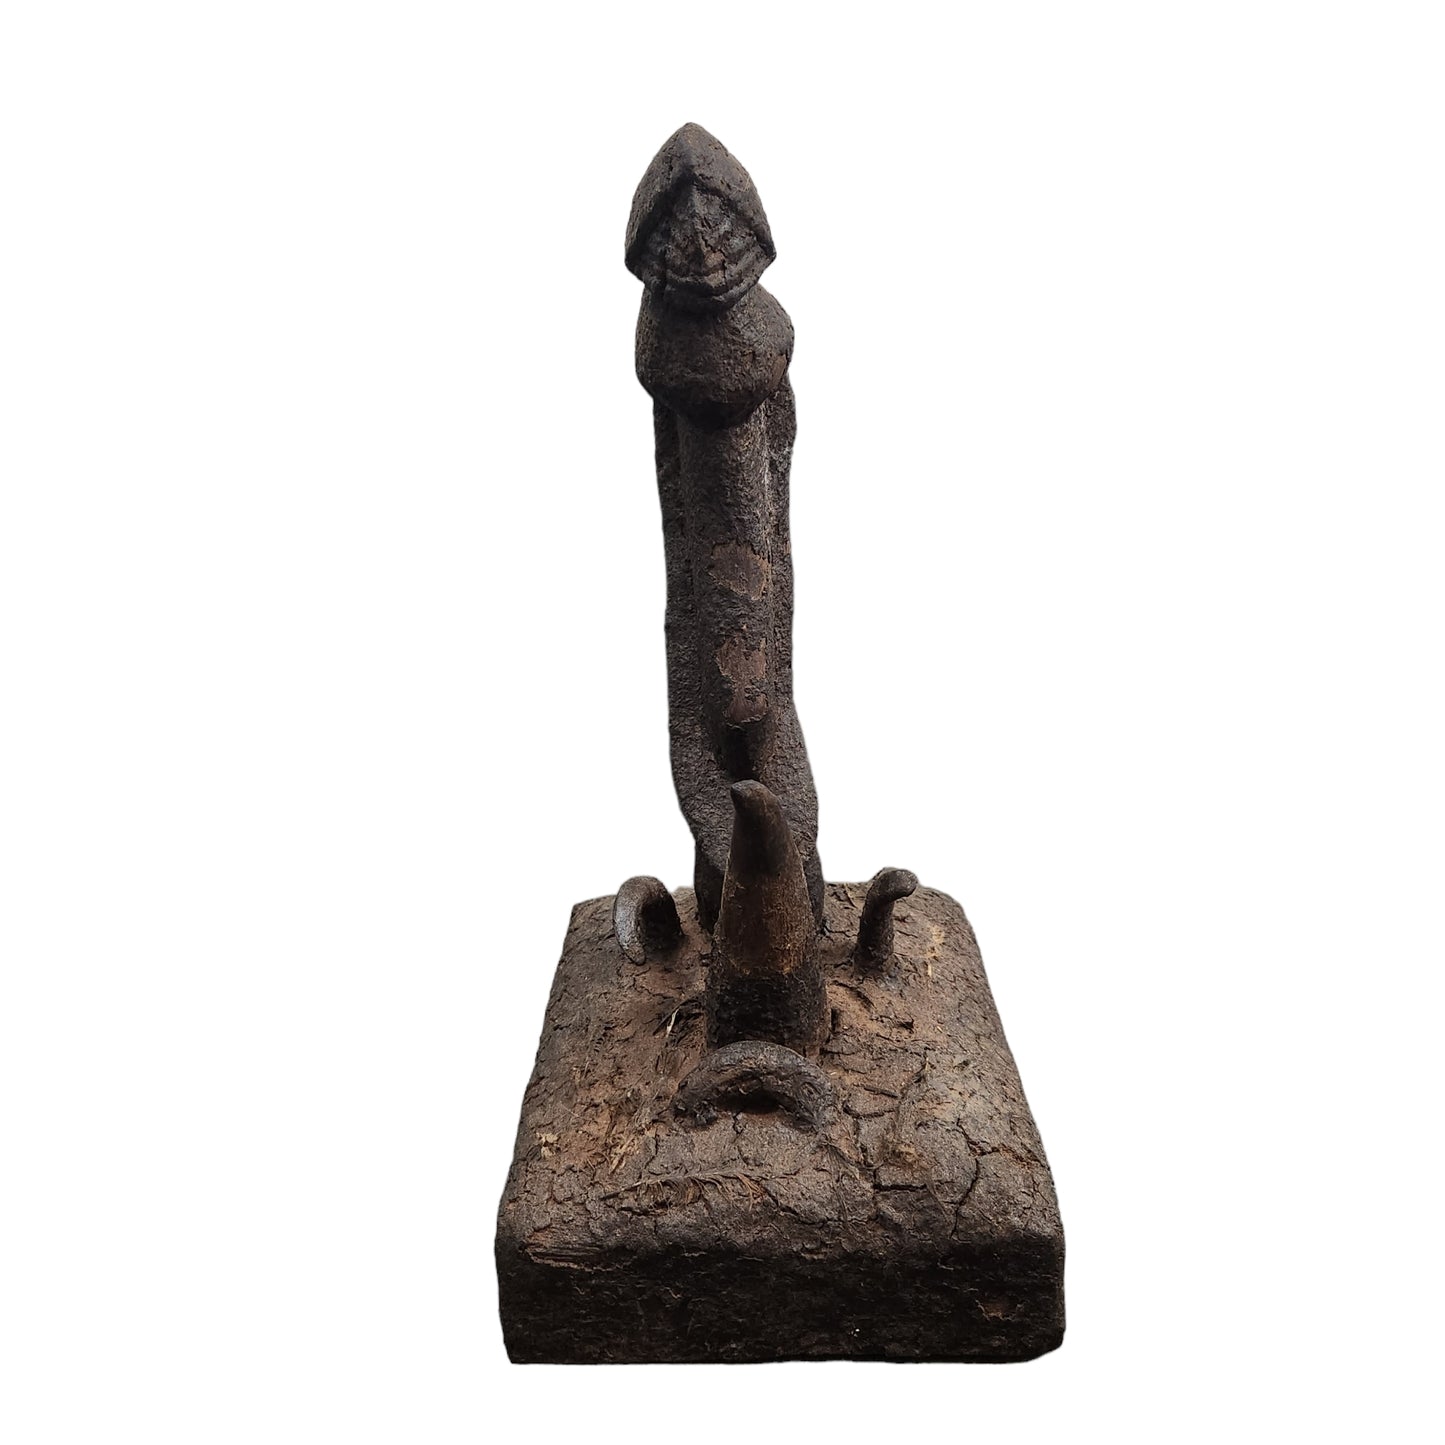 Dongon Fetish from Mali (19th Century) - MD African Art